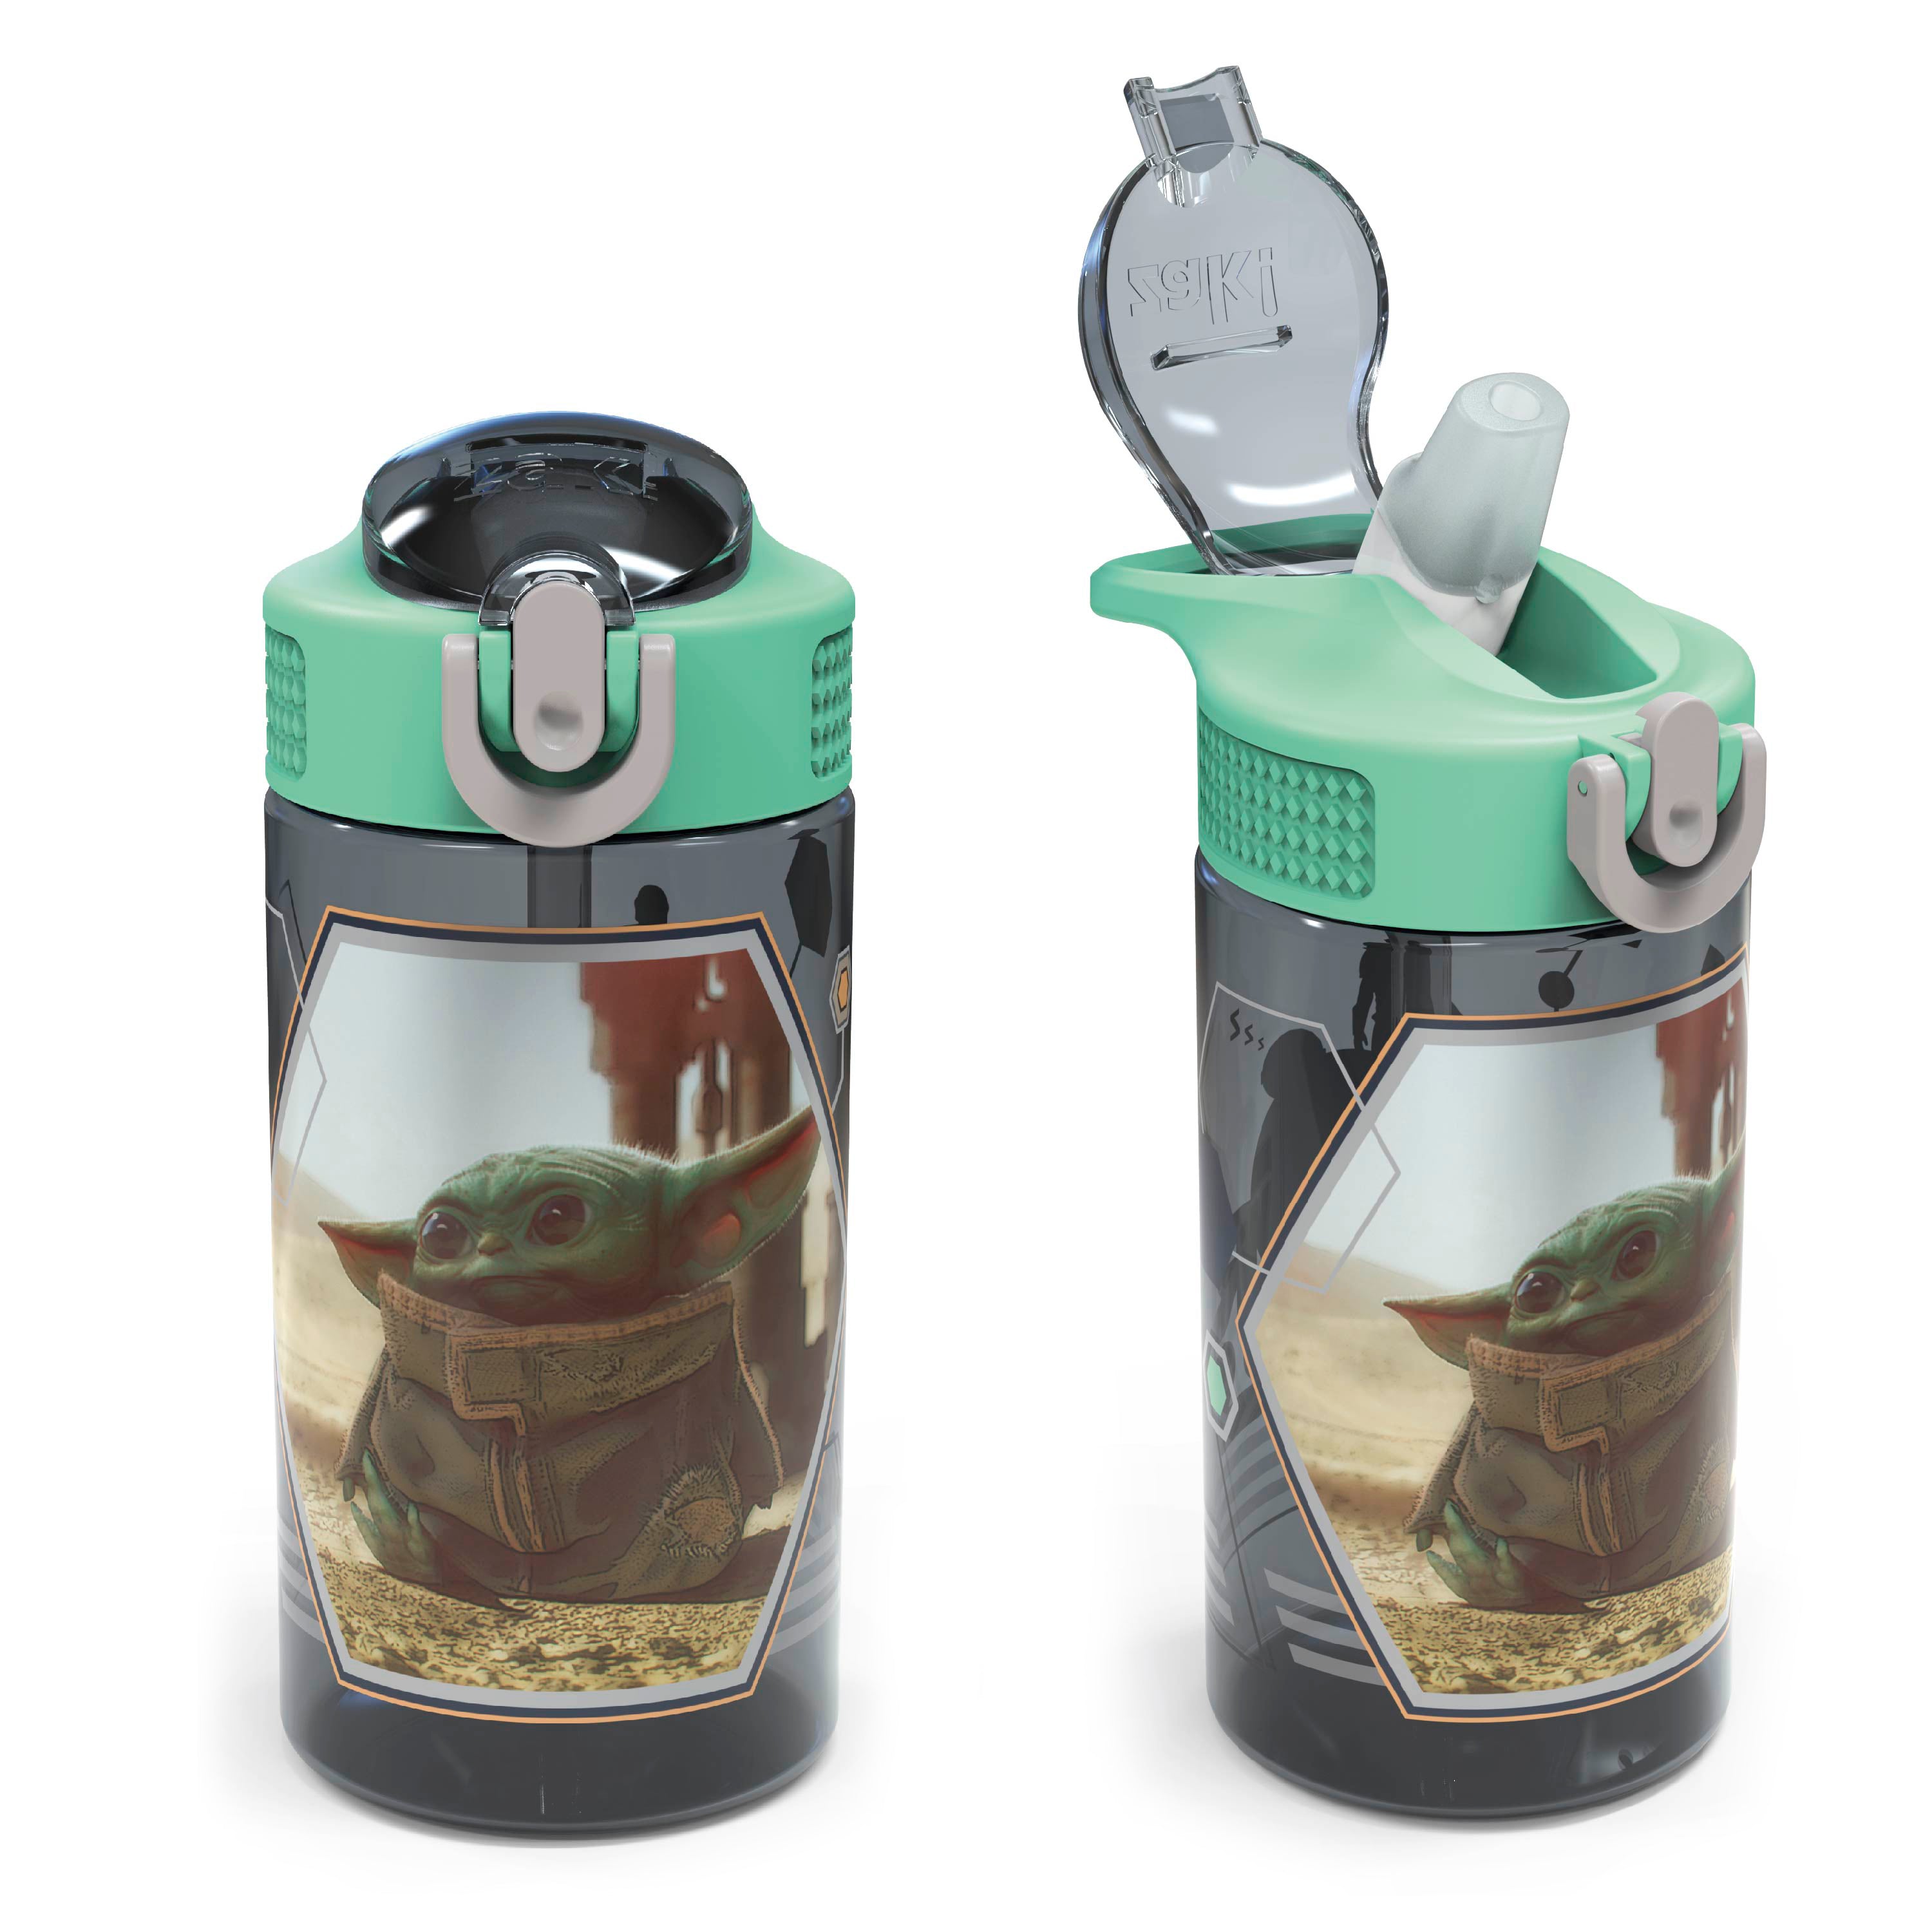 Star Wars The Child Baby Yoda Kids Plastic Water Bottle with Leak Proof Lid and Spout - 2 Pack, 16 ounce